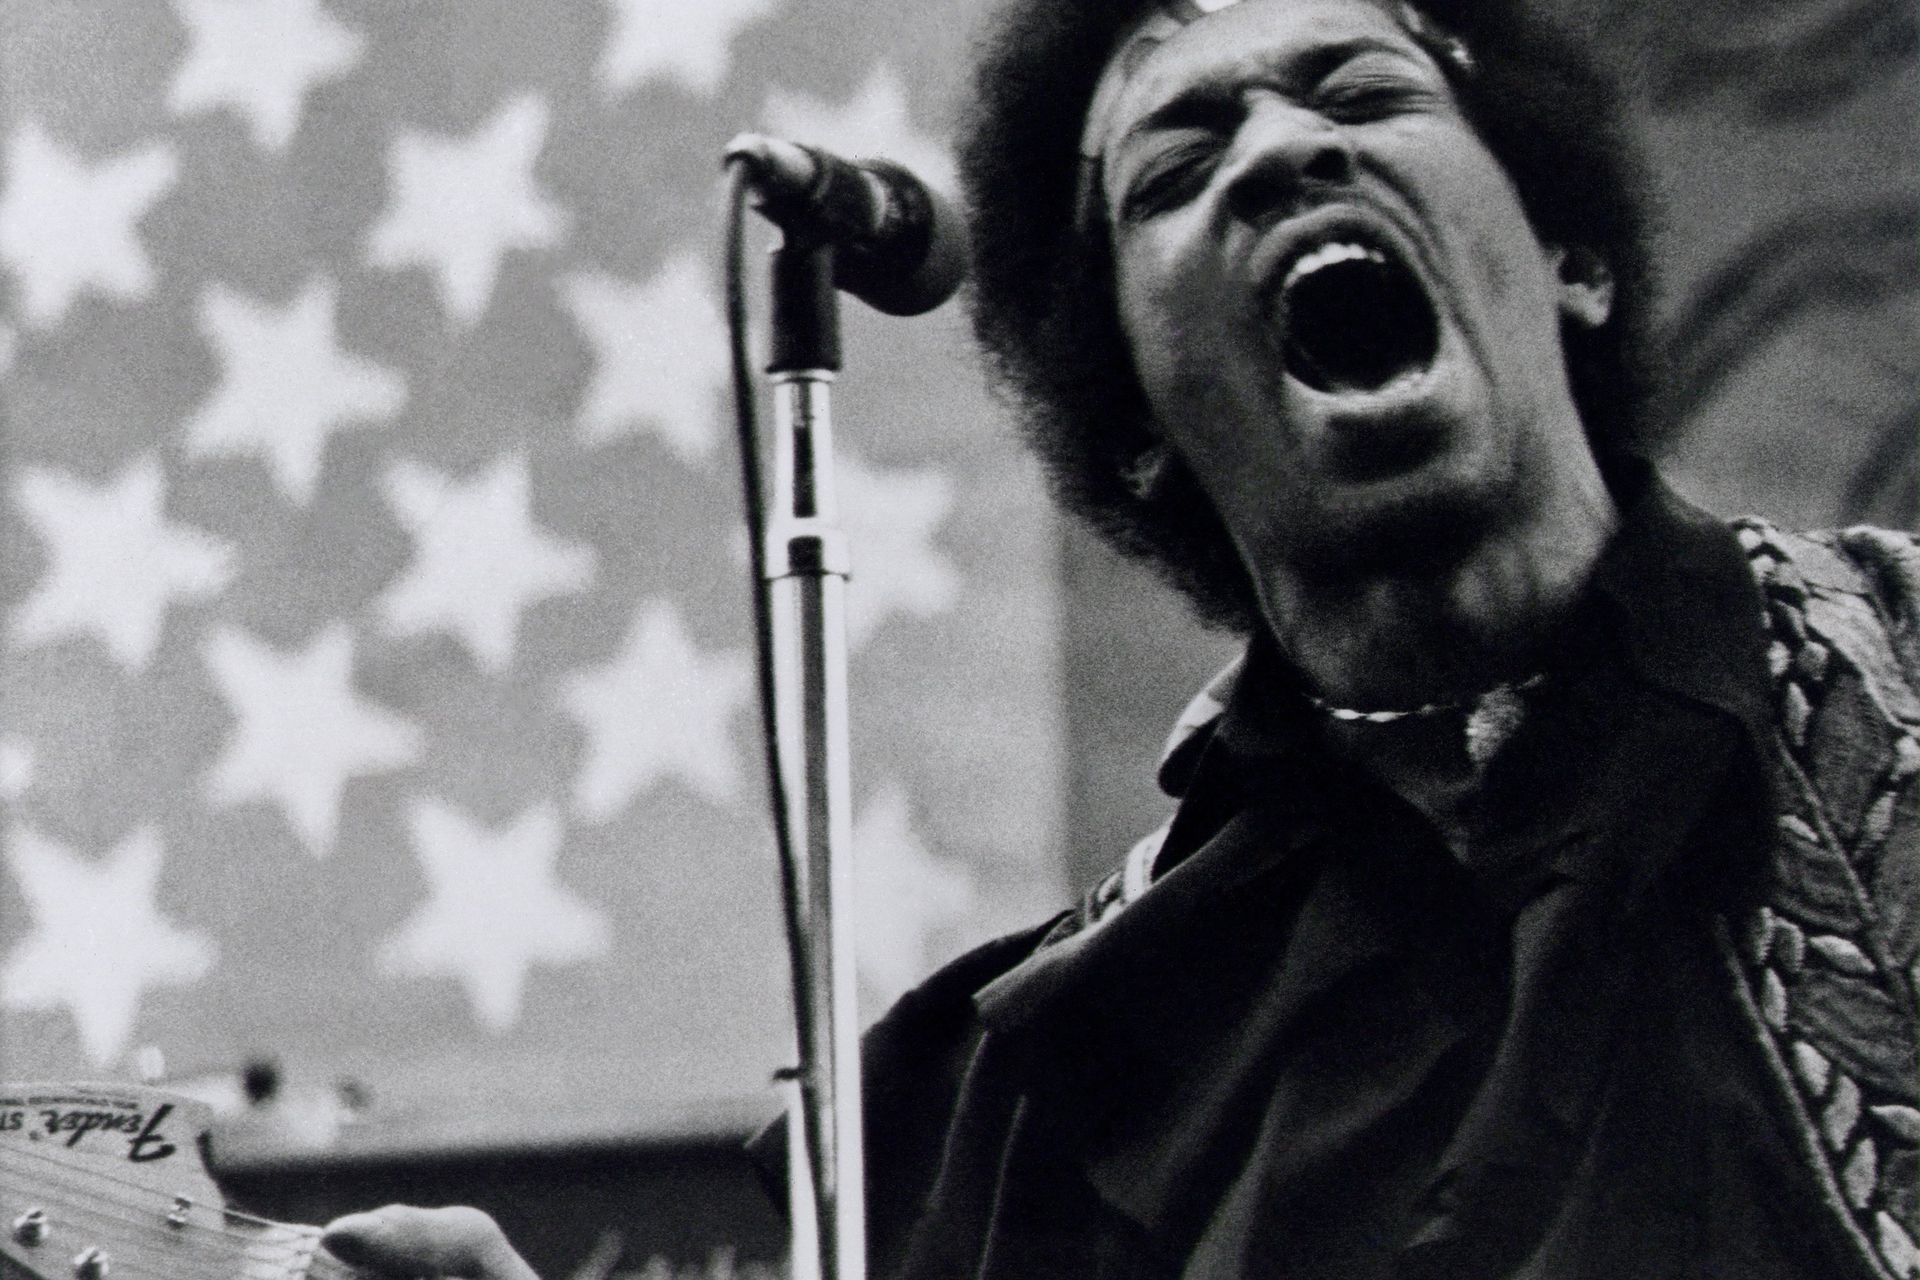 <p>On September 18, 1970, Jimi Hendrix died in his sleep, in a hotel in Notting Hill, London, after taking too many sleeping pills mixed with wine. The guitarist reportedly died of suffocation on his vomit. At the foot of his bed, a poem was found with these scribbled words, probably his last: "The story of life is quicker than the blink of an eye. The story of love is hello and goodbye Until we meet again."</p>